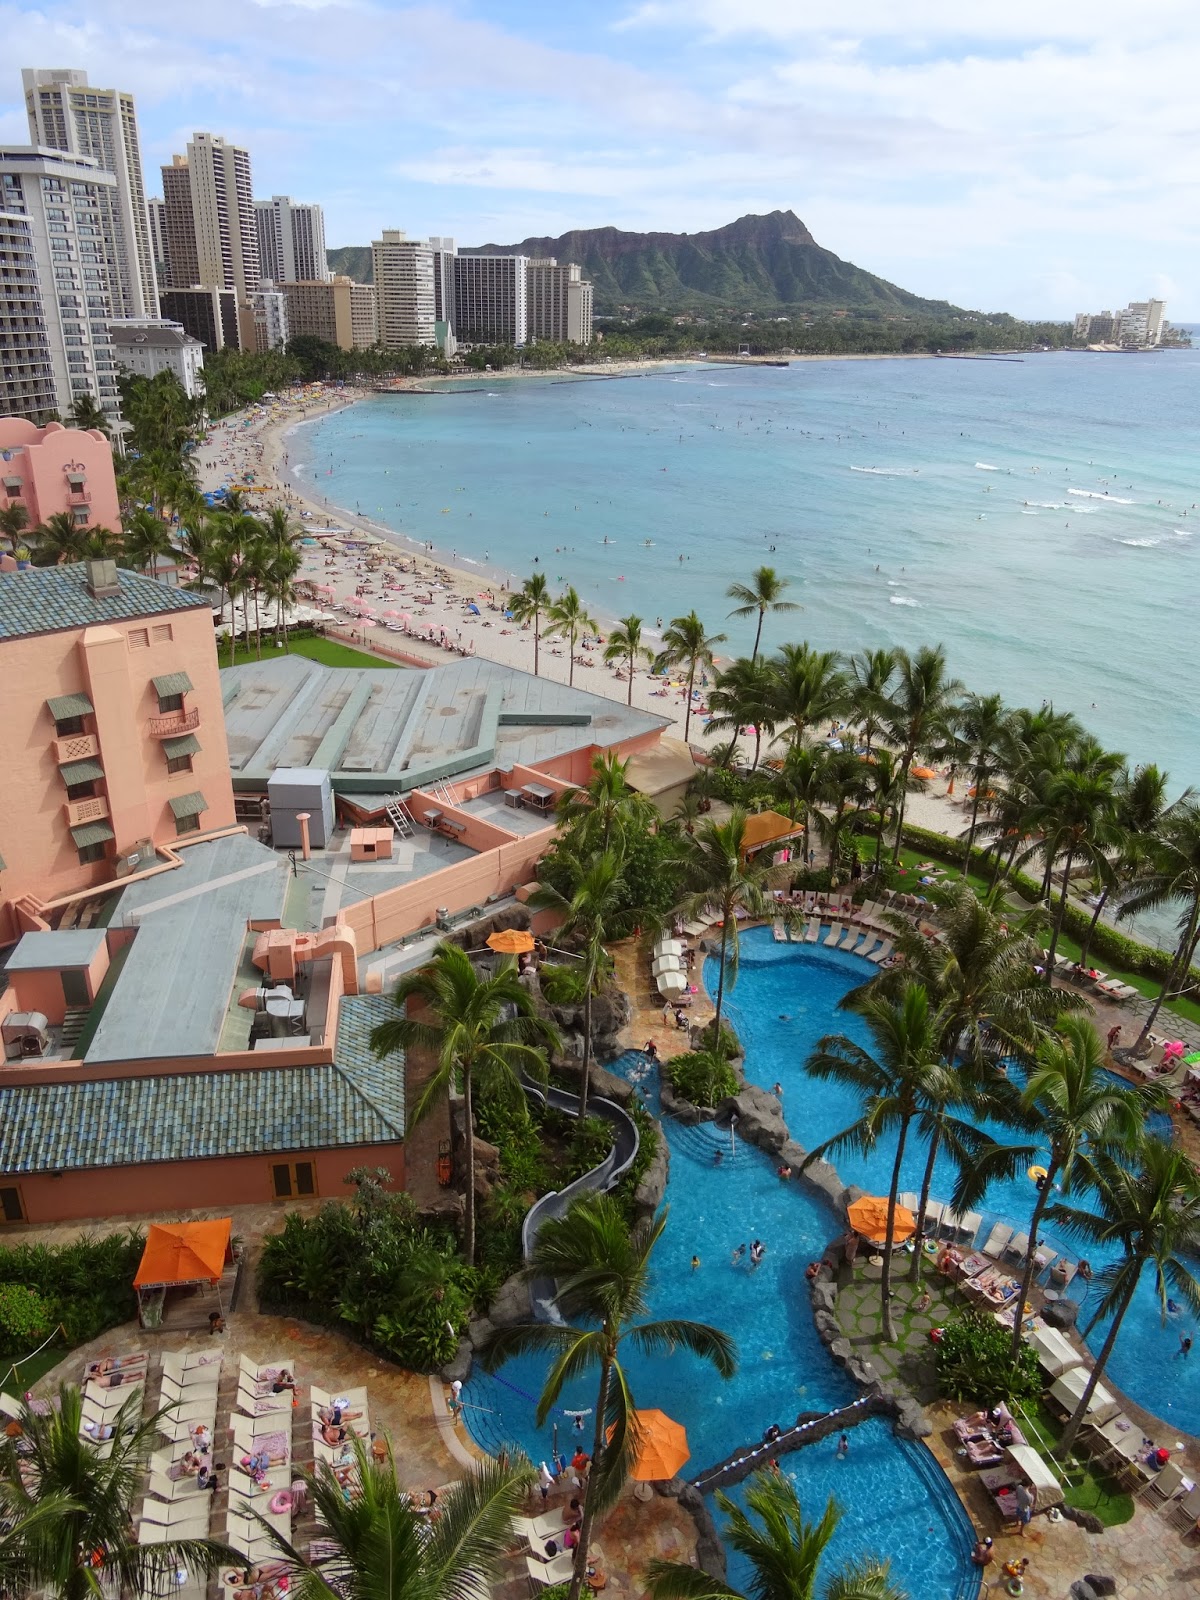 24-HOURS IN WAIKIKI ~ Asian It Solutions